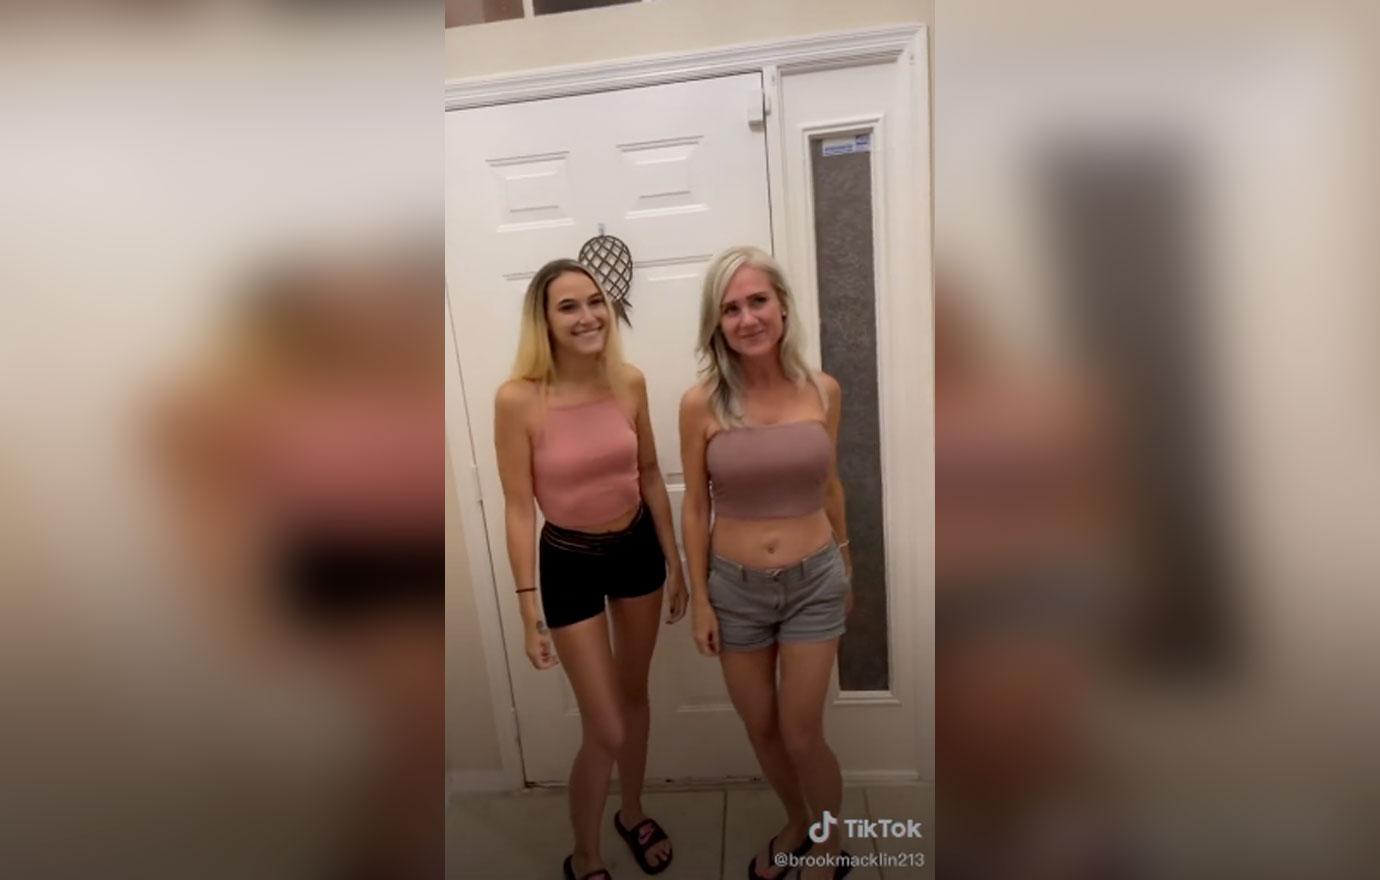 Viral TikTok Swinger Who Shares Her Husband With Her Mom and Sister Blowdries Her Private Parts To Provide Hot Meal picture